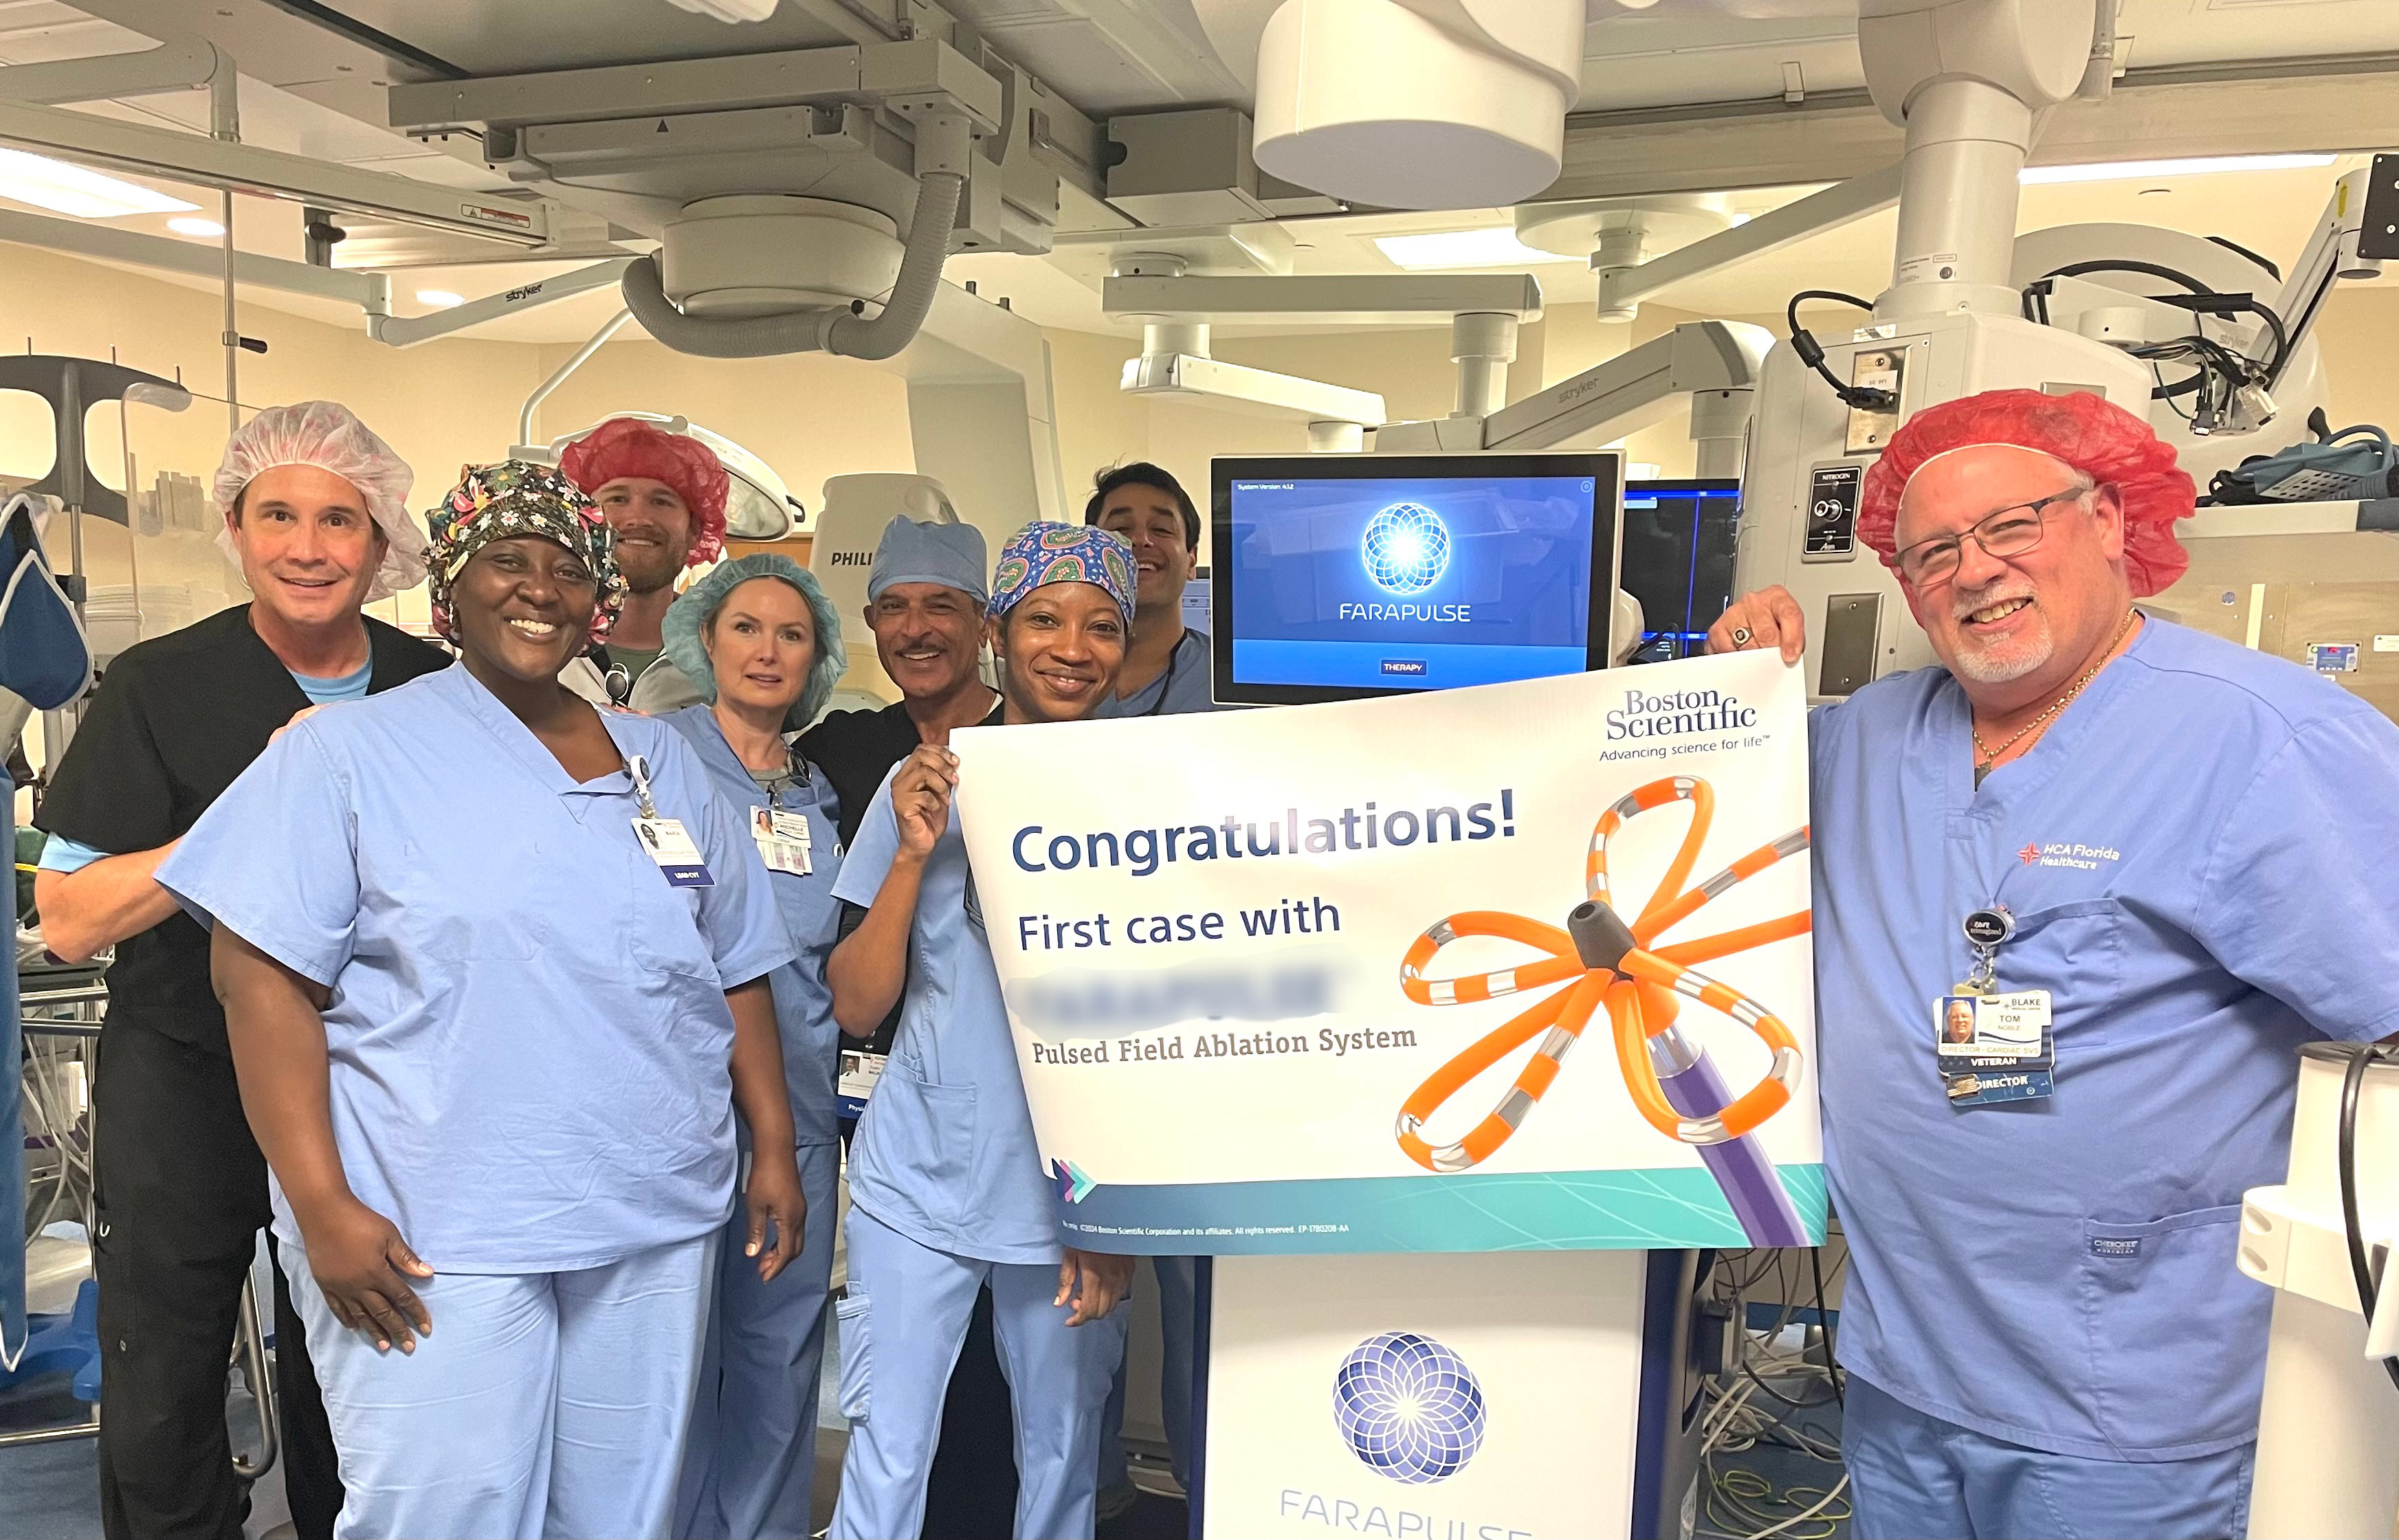 The Blake cardiac team holding congratulations sign, celebrating first non-thermal ablation procedure in Manatee County